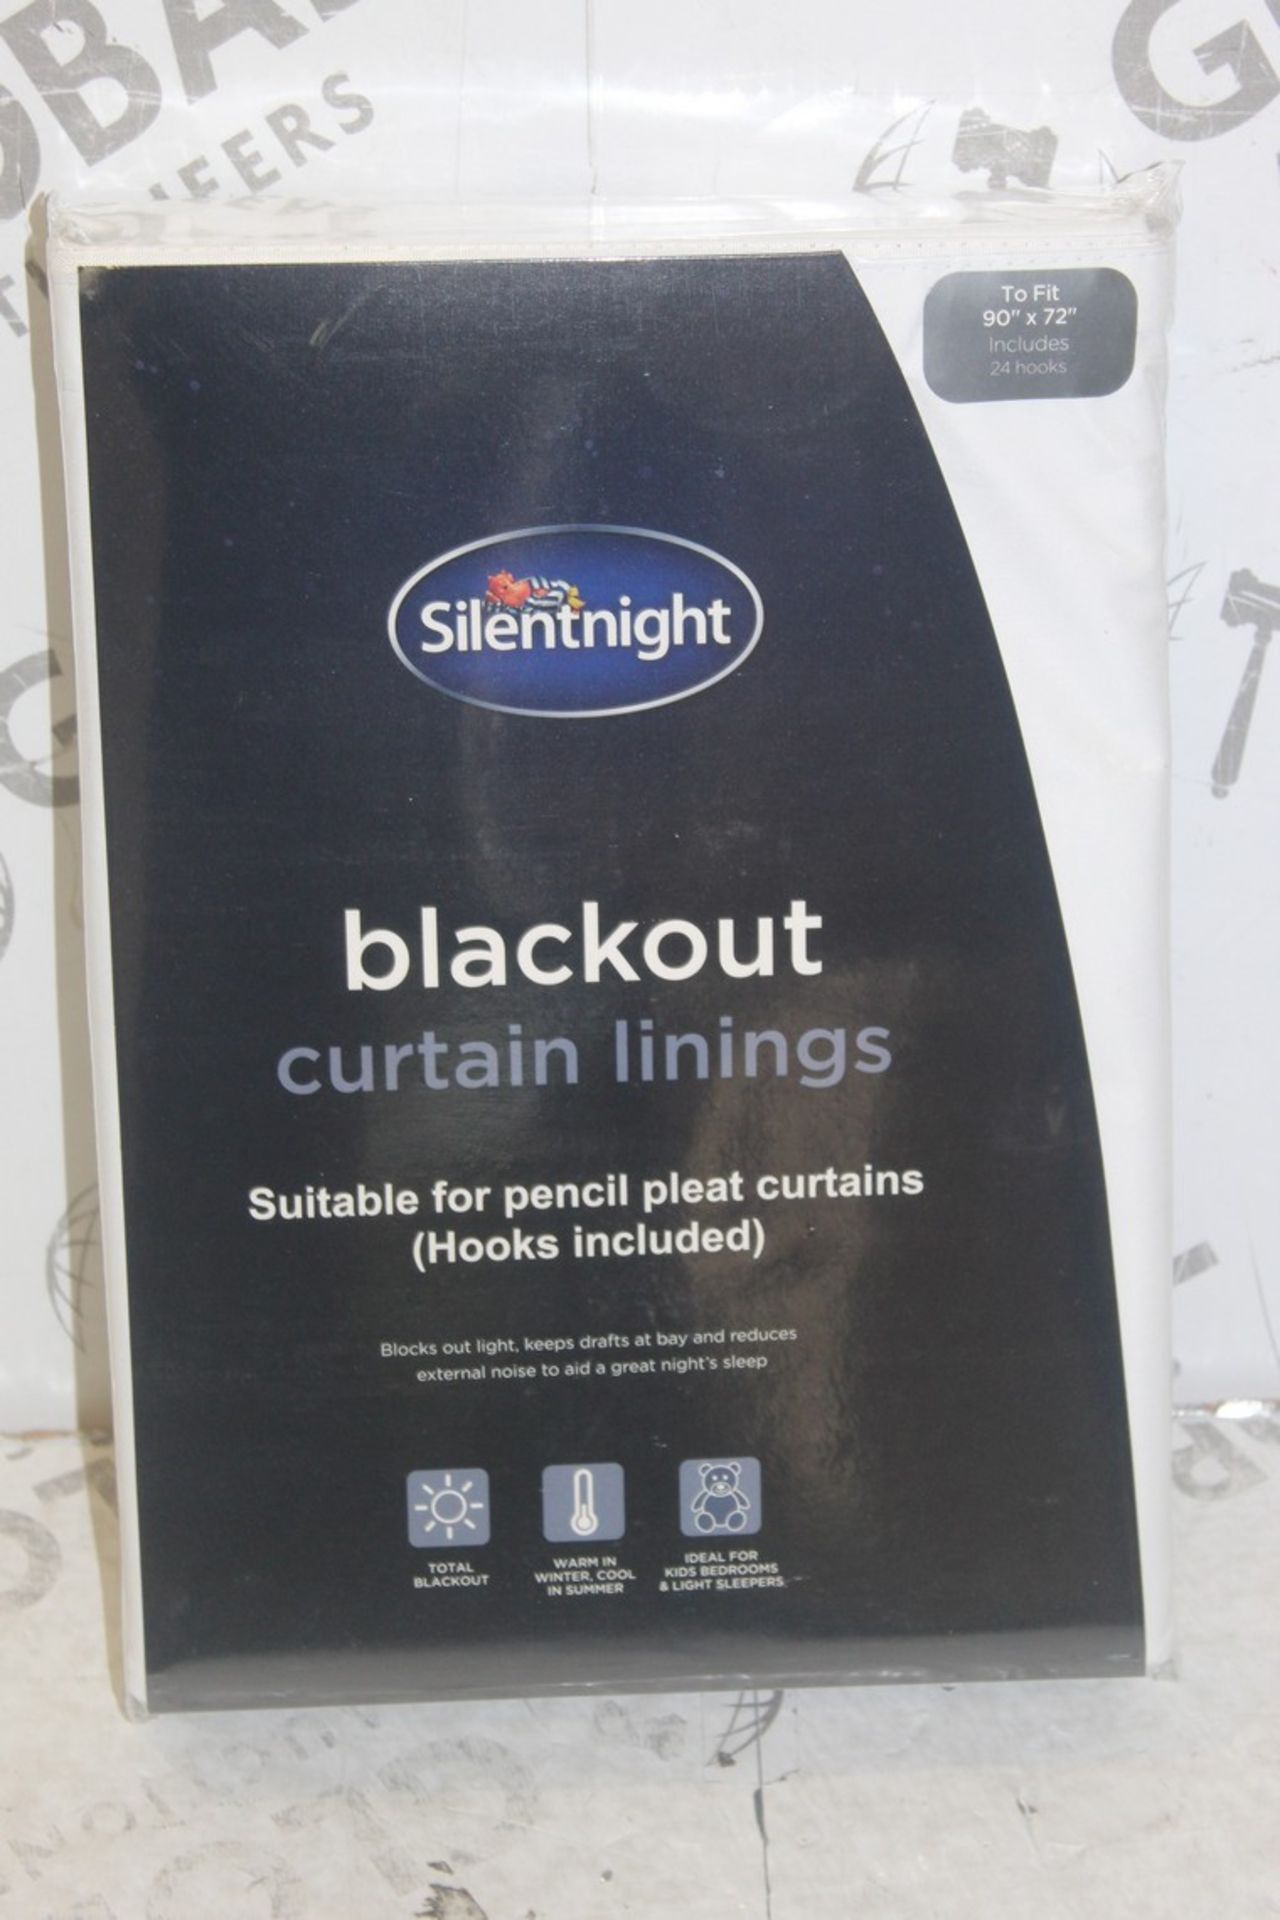 Lot To Contain 5 90 x 72" Silent Night Blackout Curtain Linings Combined RRP £650 (Pictures Are